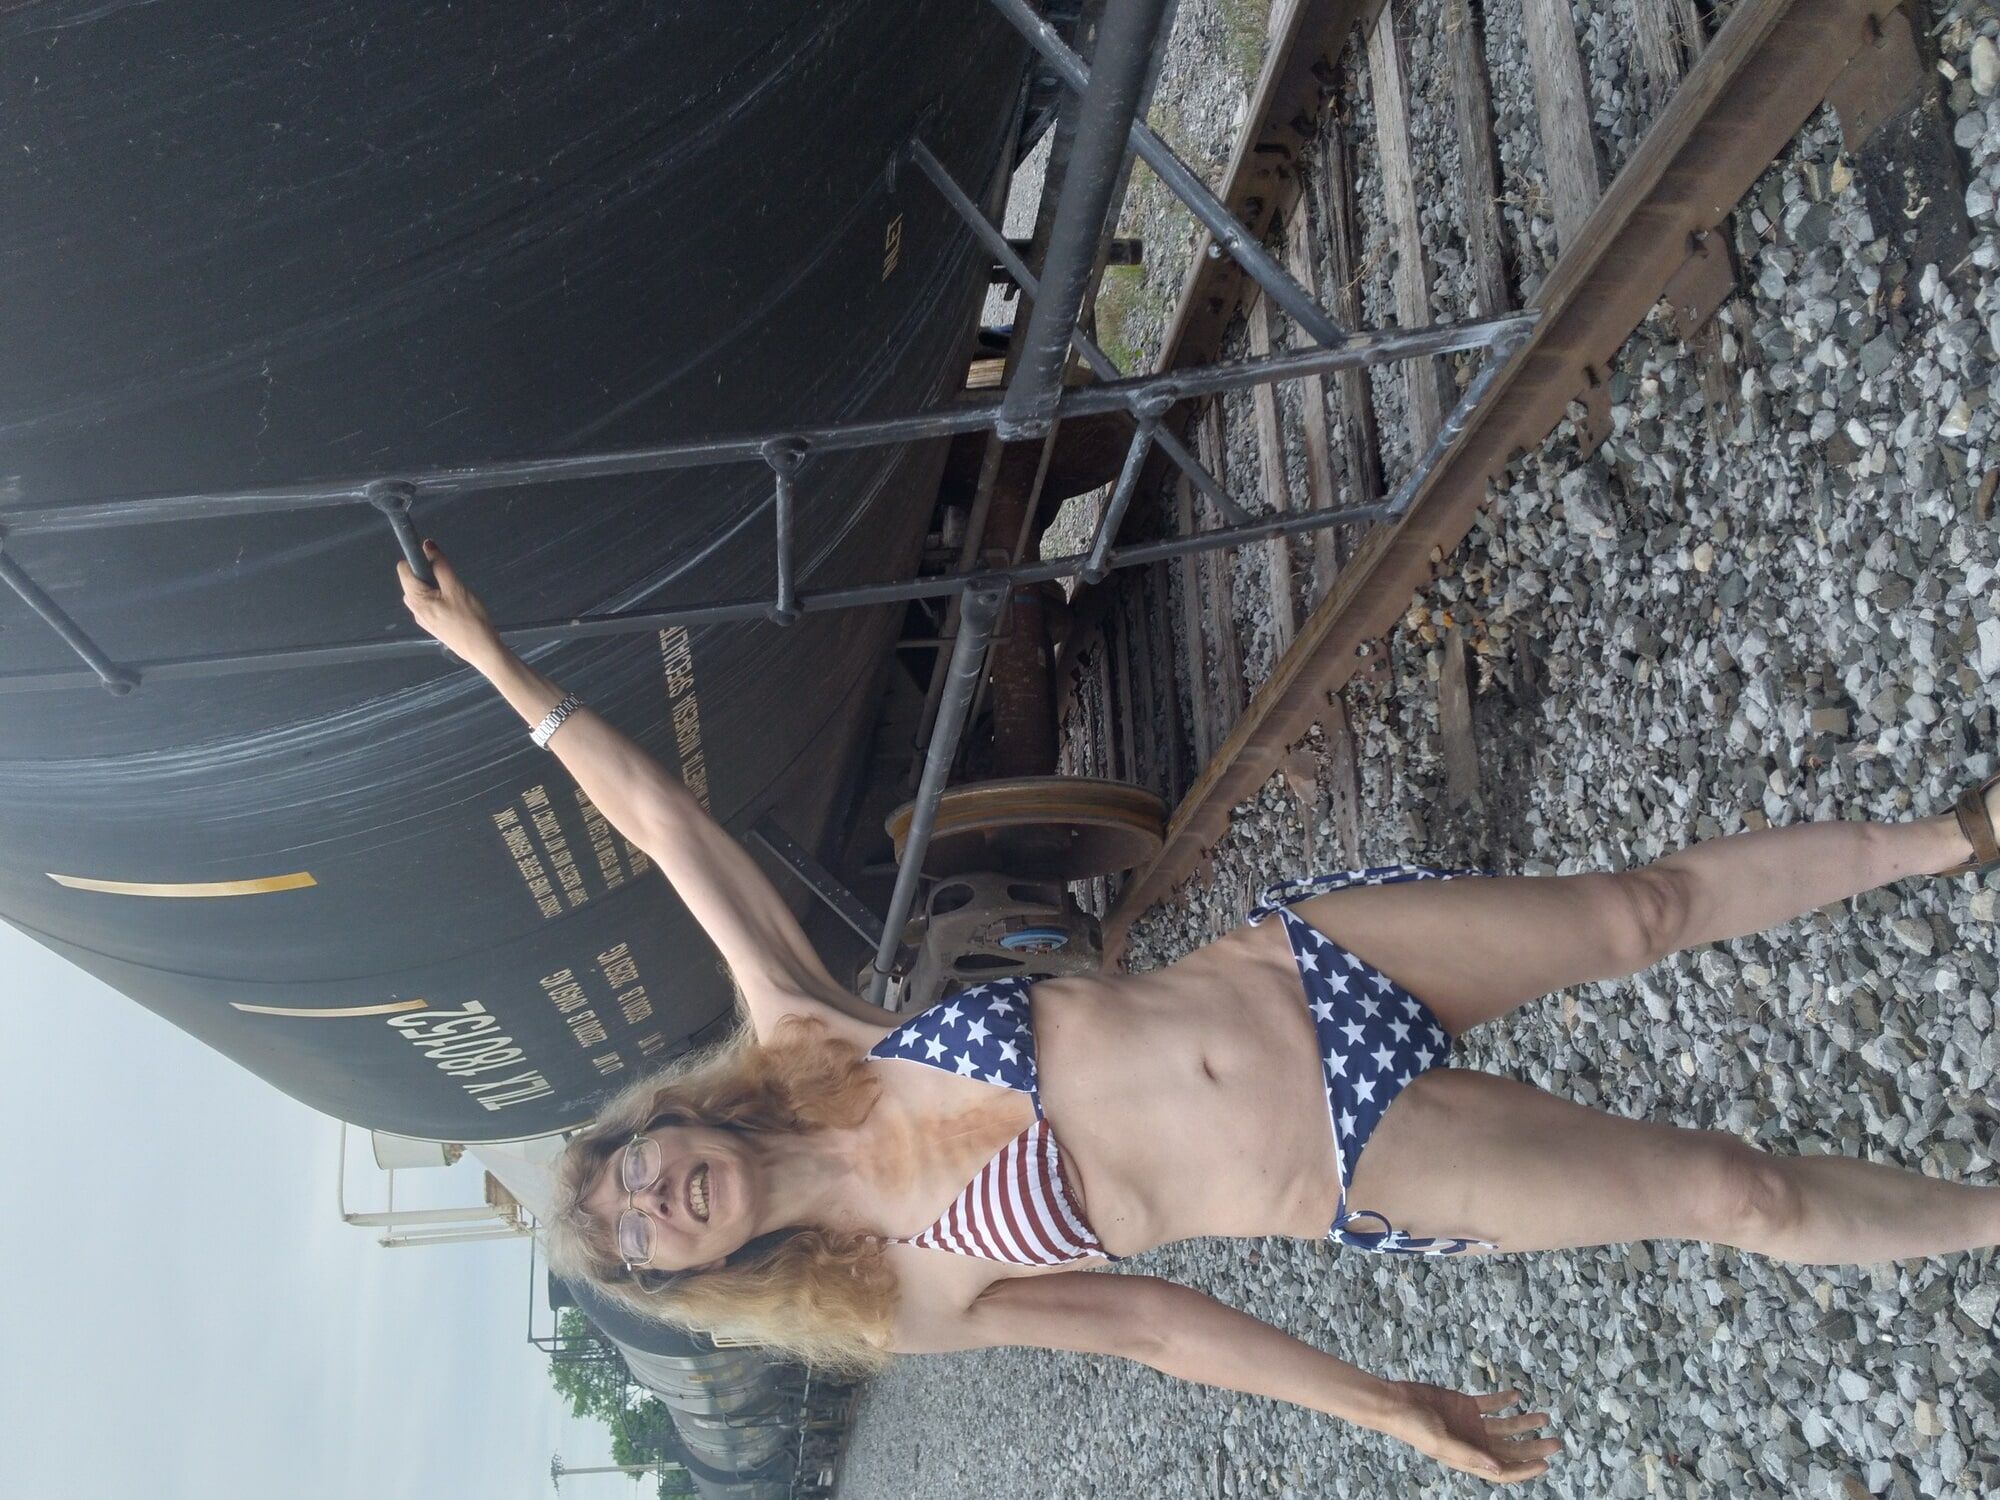 American Train. July 4th release. My best photo set to date. #15